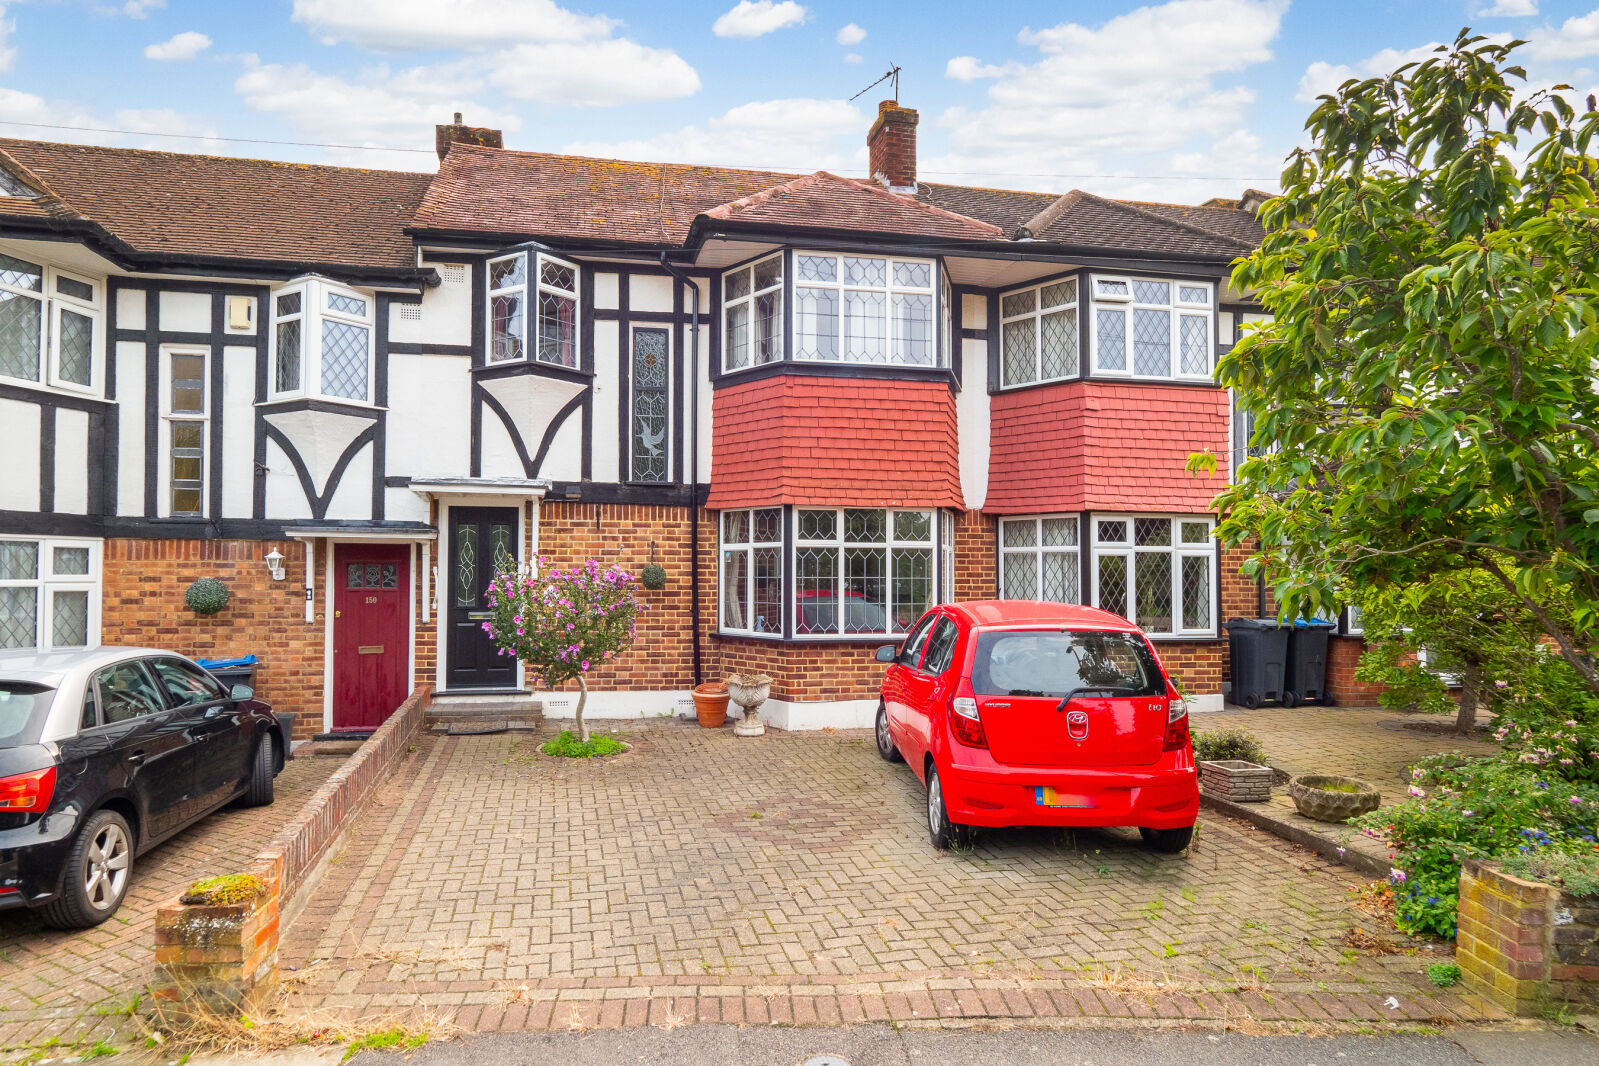 3 bedroom mid terraced house for sale Cardinal Avenue, Morden, SM4, main image